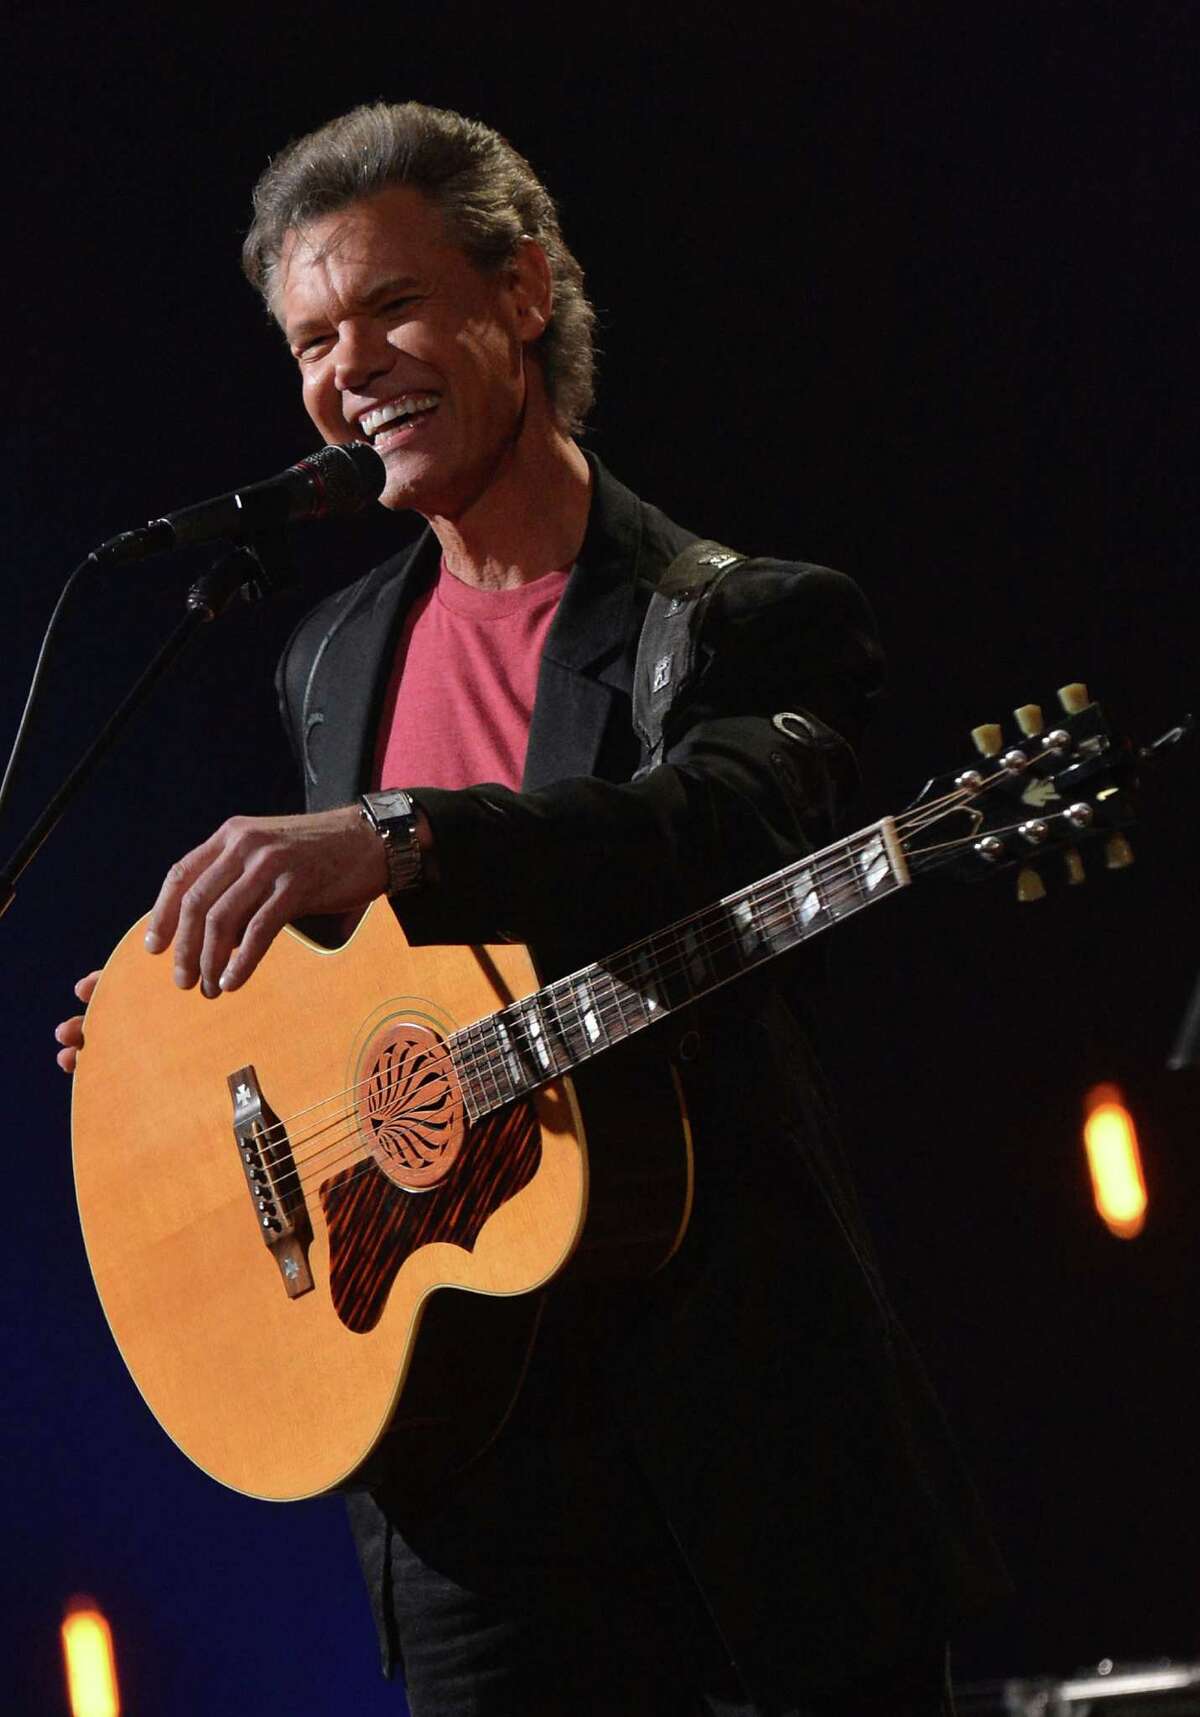 Despite recent troubles, Randy Travis continues to perform before sell-out crowds. Getty Images